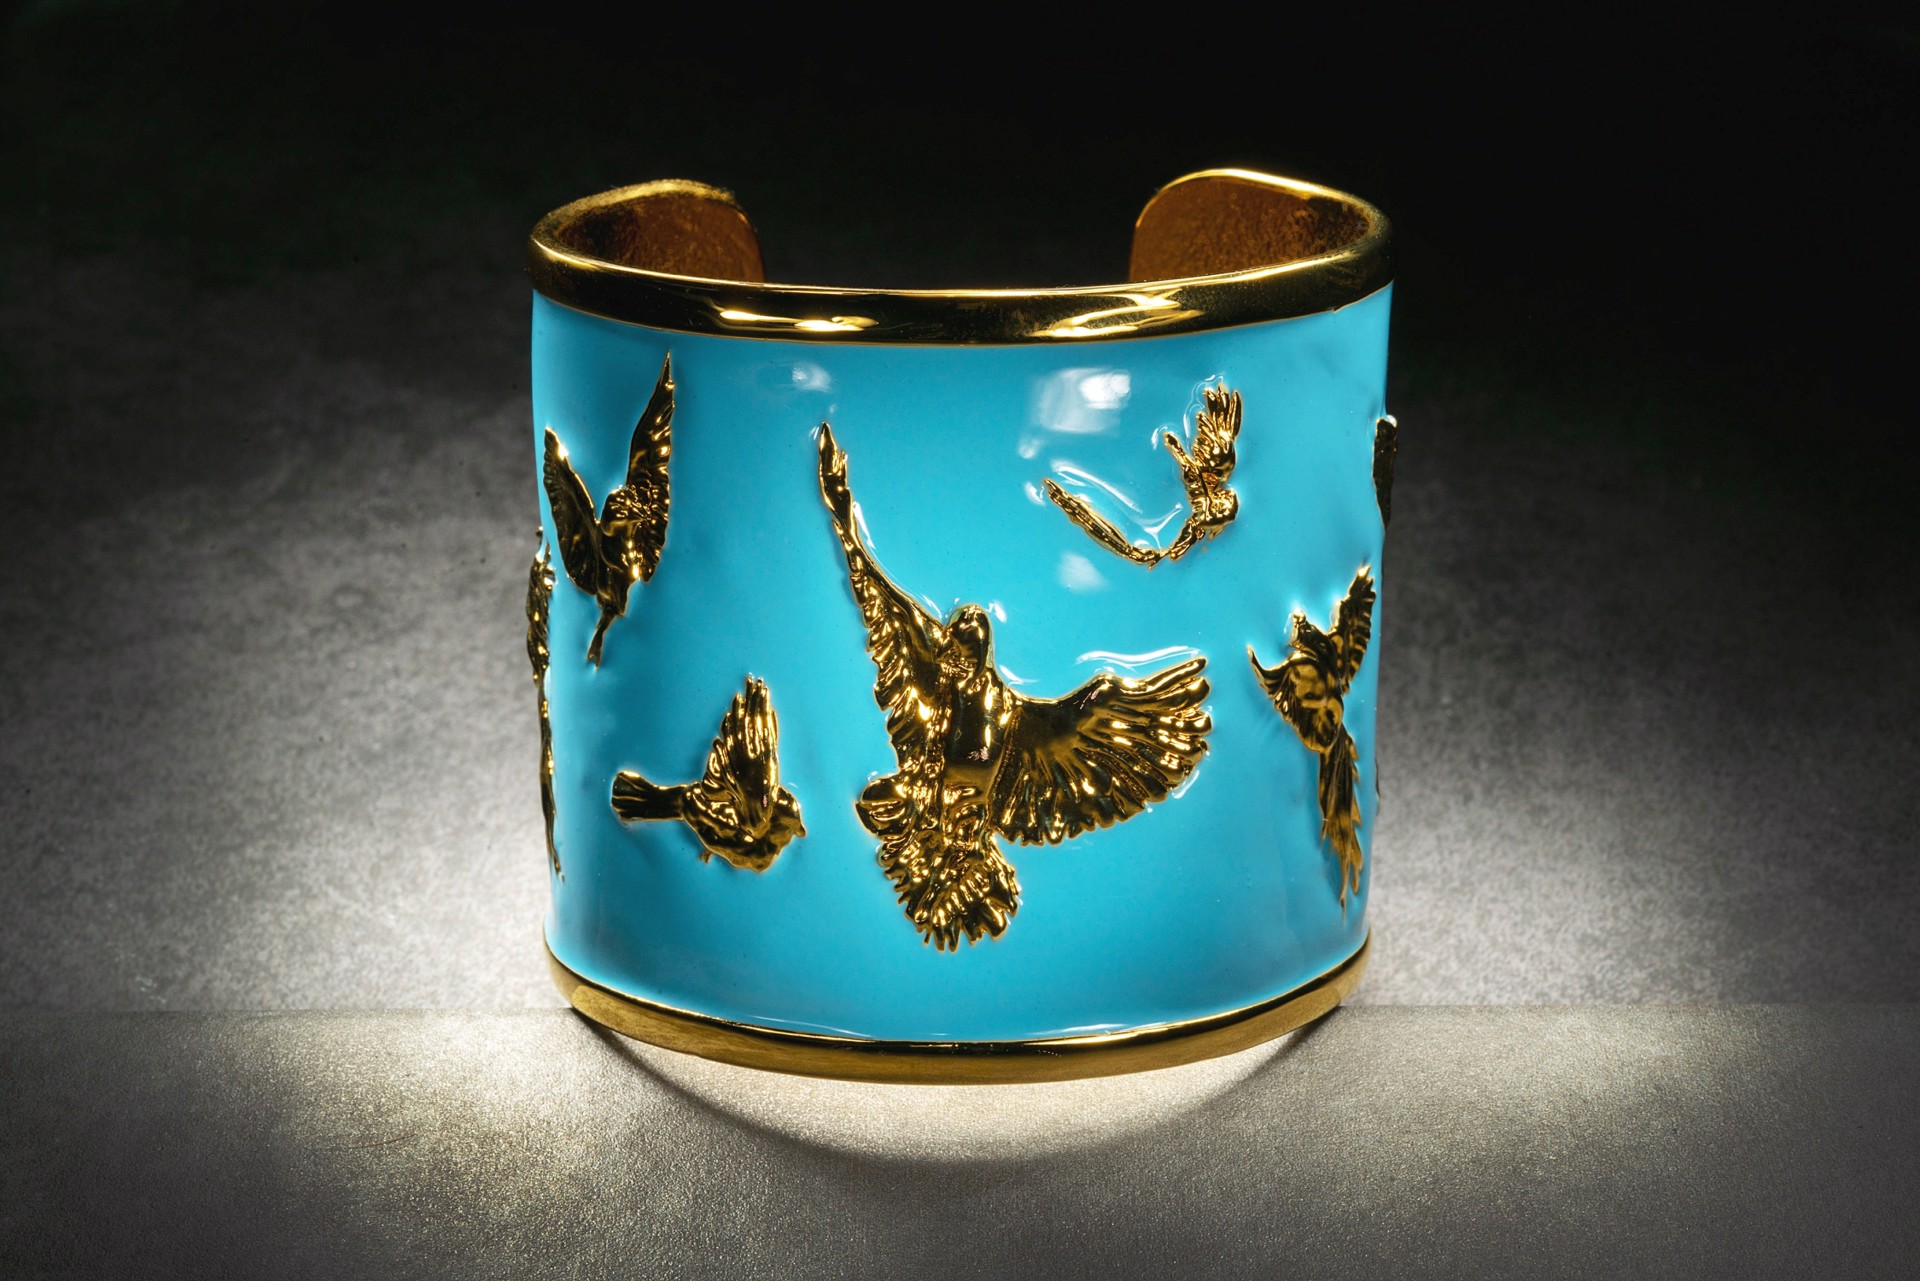 Arise Cuff - Gold and Sky Blue Xsm/ Small by Angela Mia